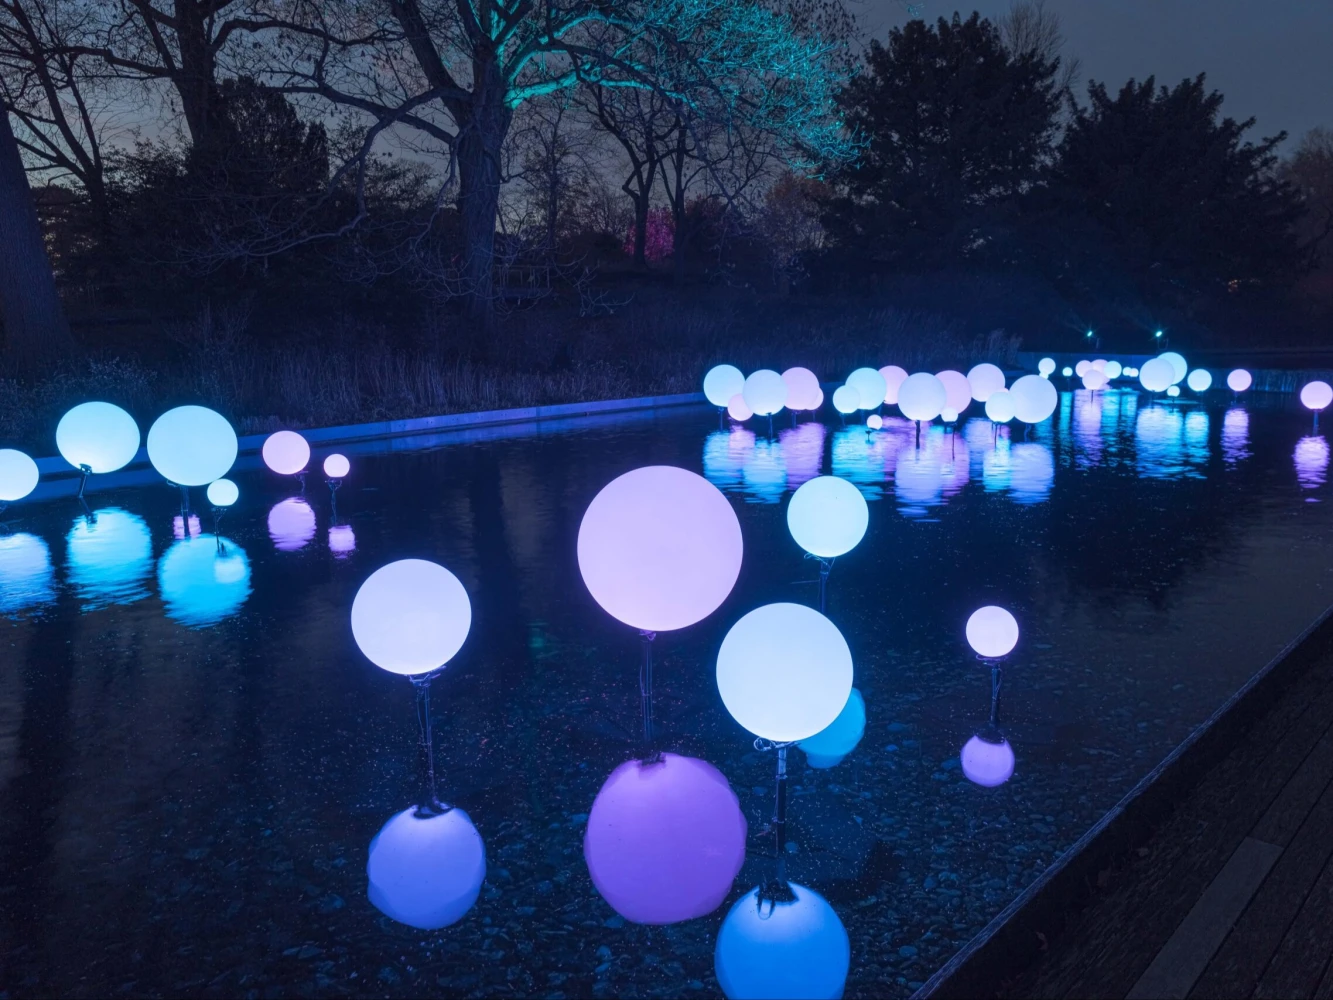 NYBG GLOW: An Outdoor Color & Light Experience: What to expect - 5